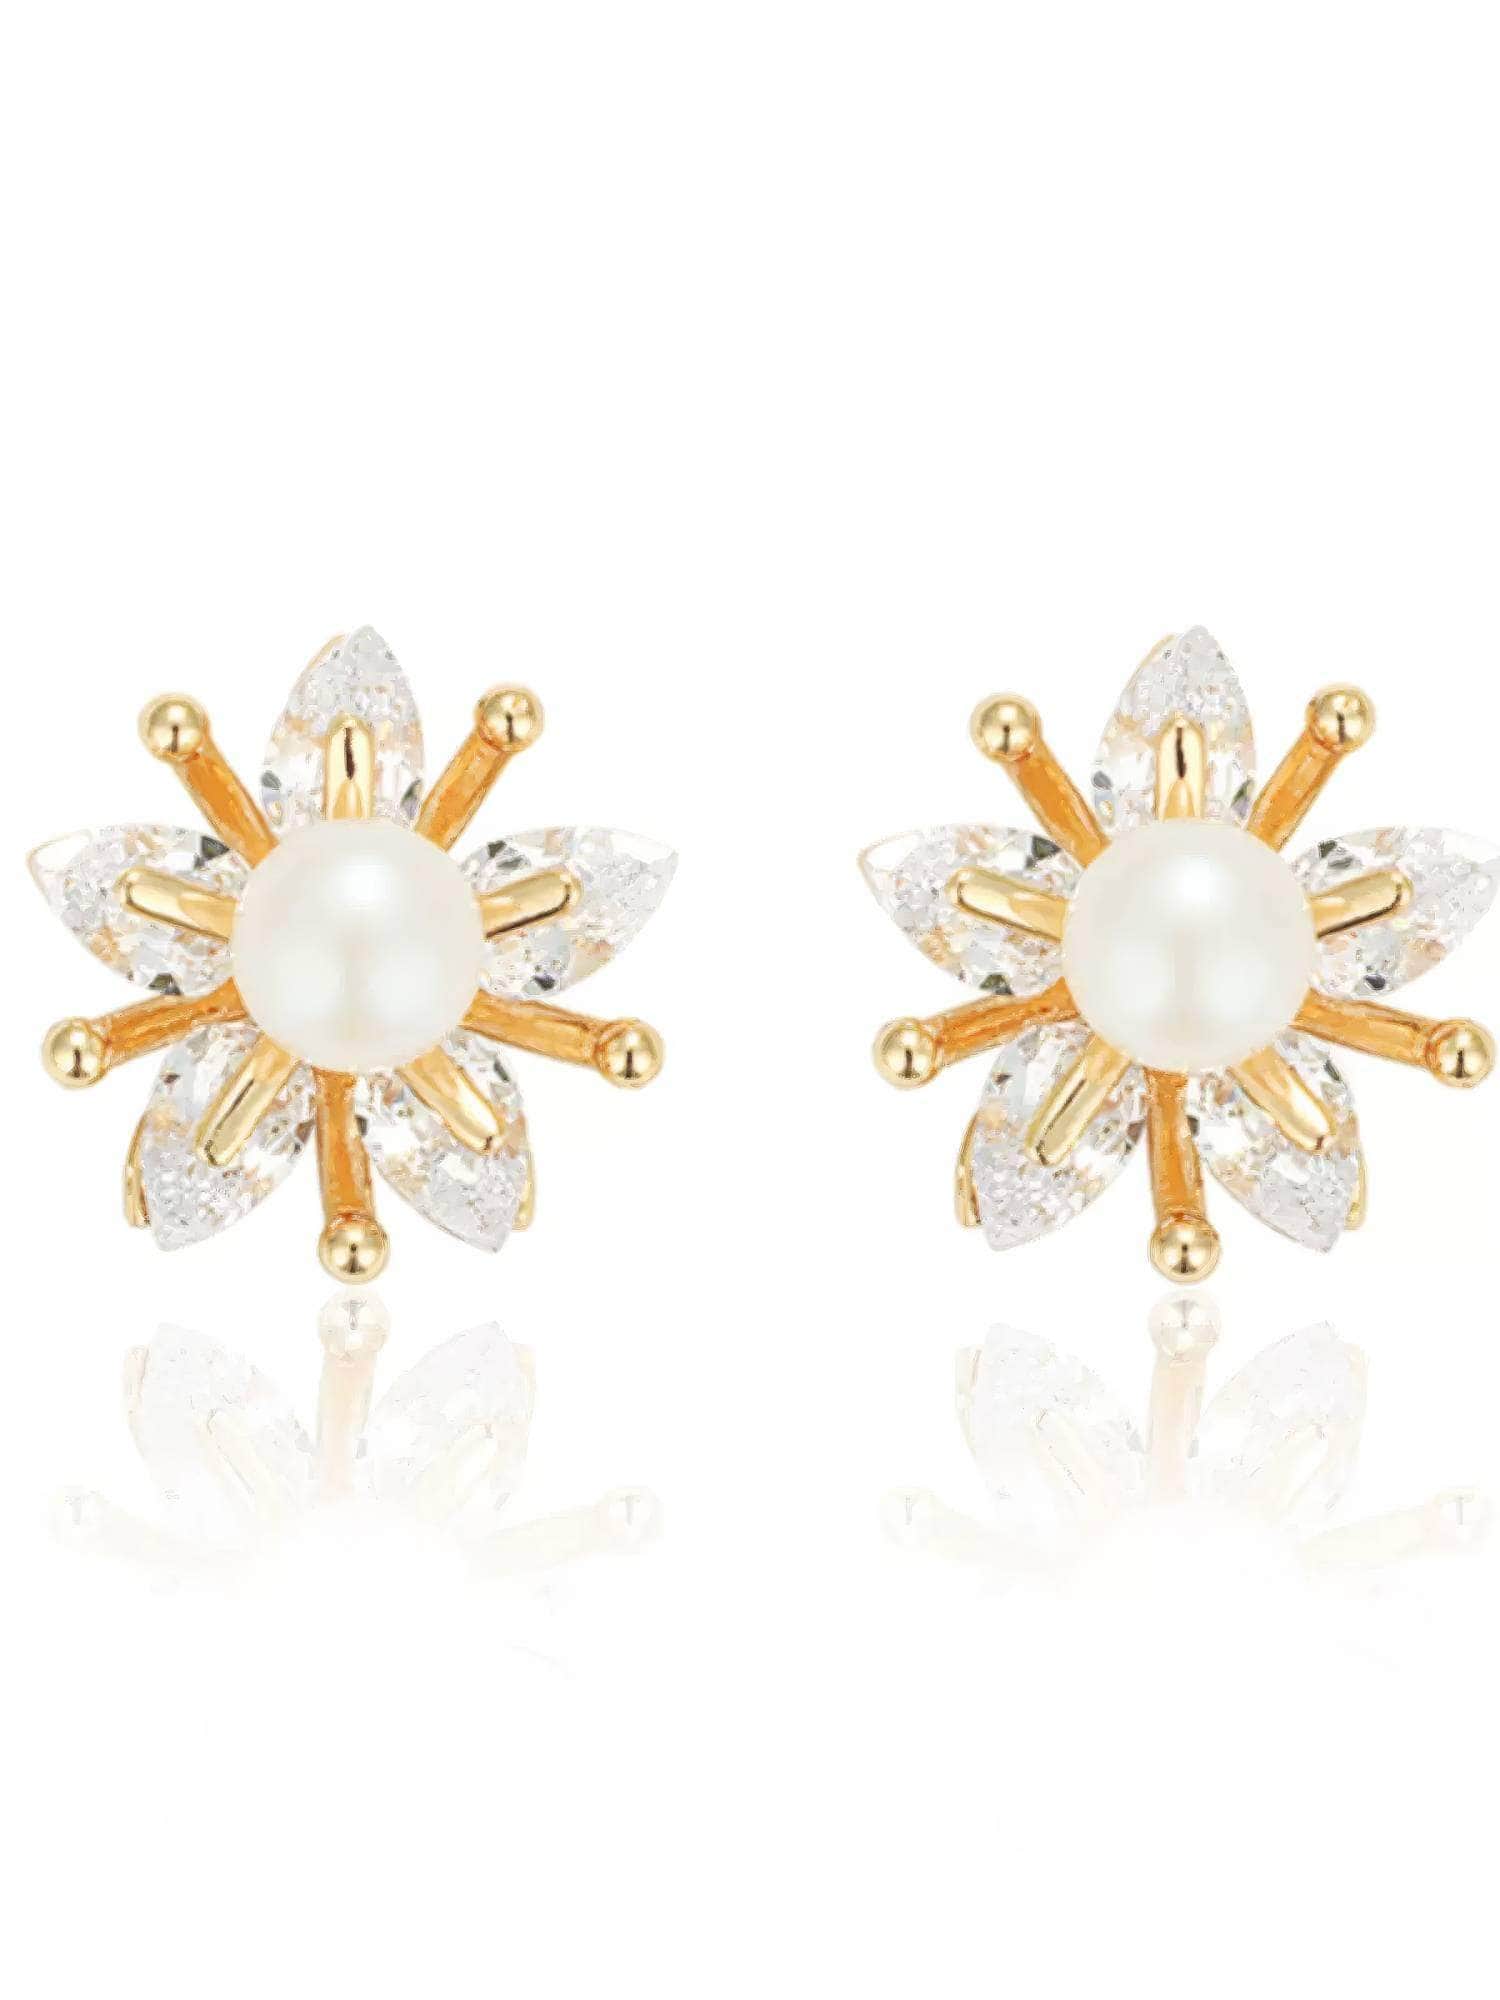 14k Paved Crystal Pearl Embellished Sunflower Stud Earrings Gold / Clip On